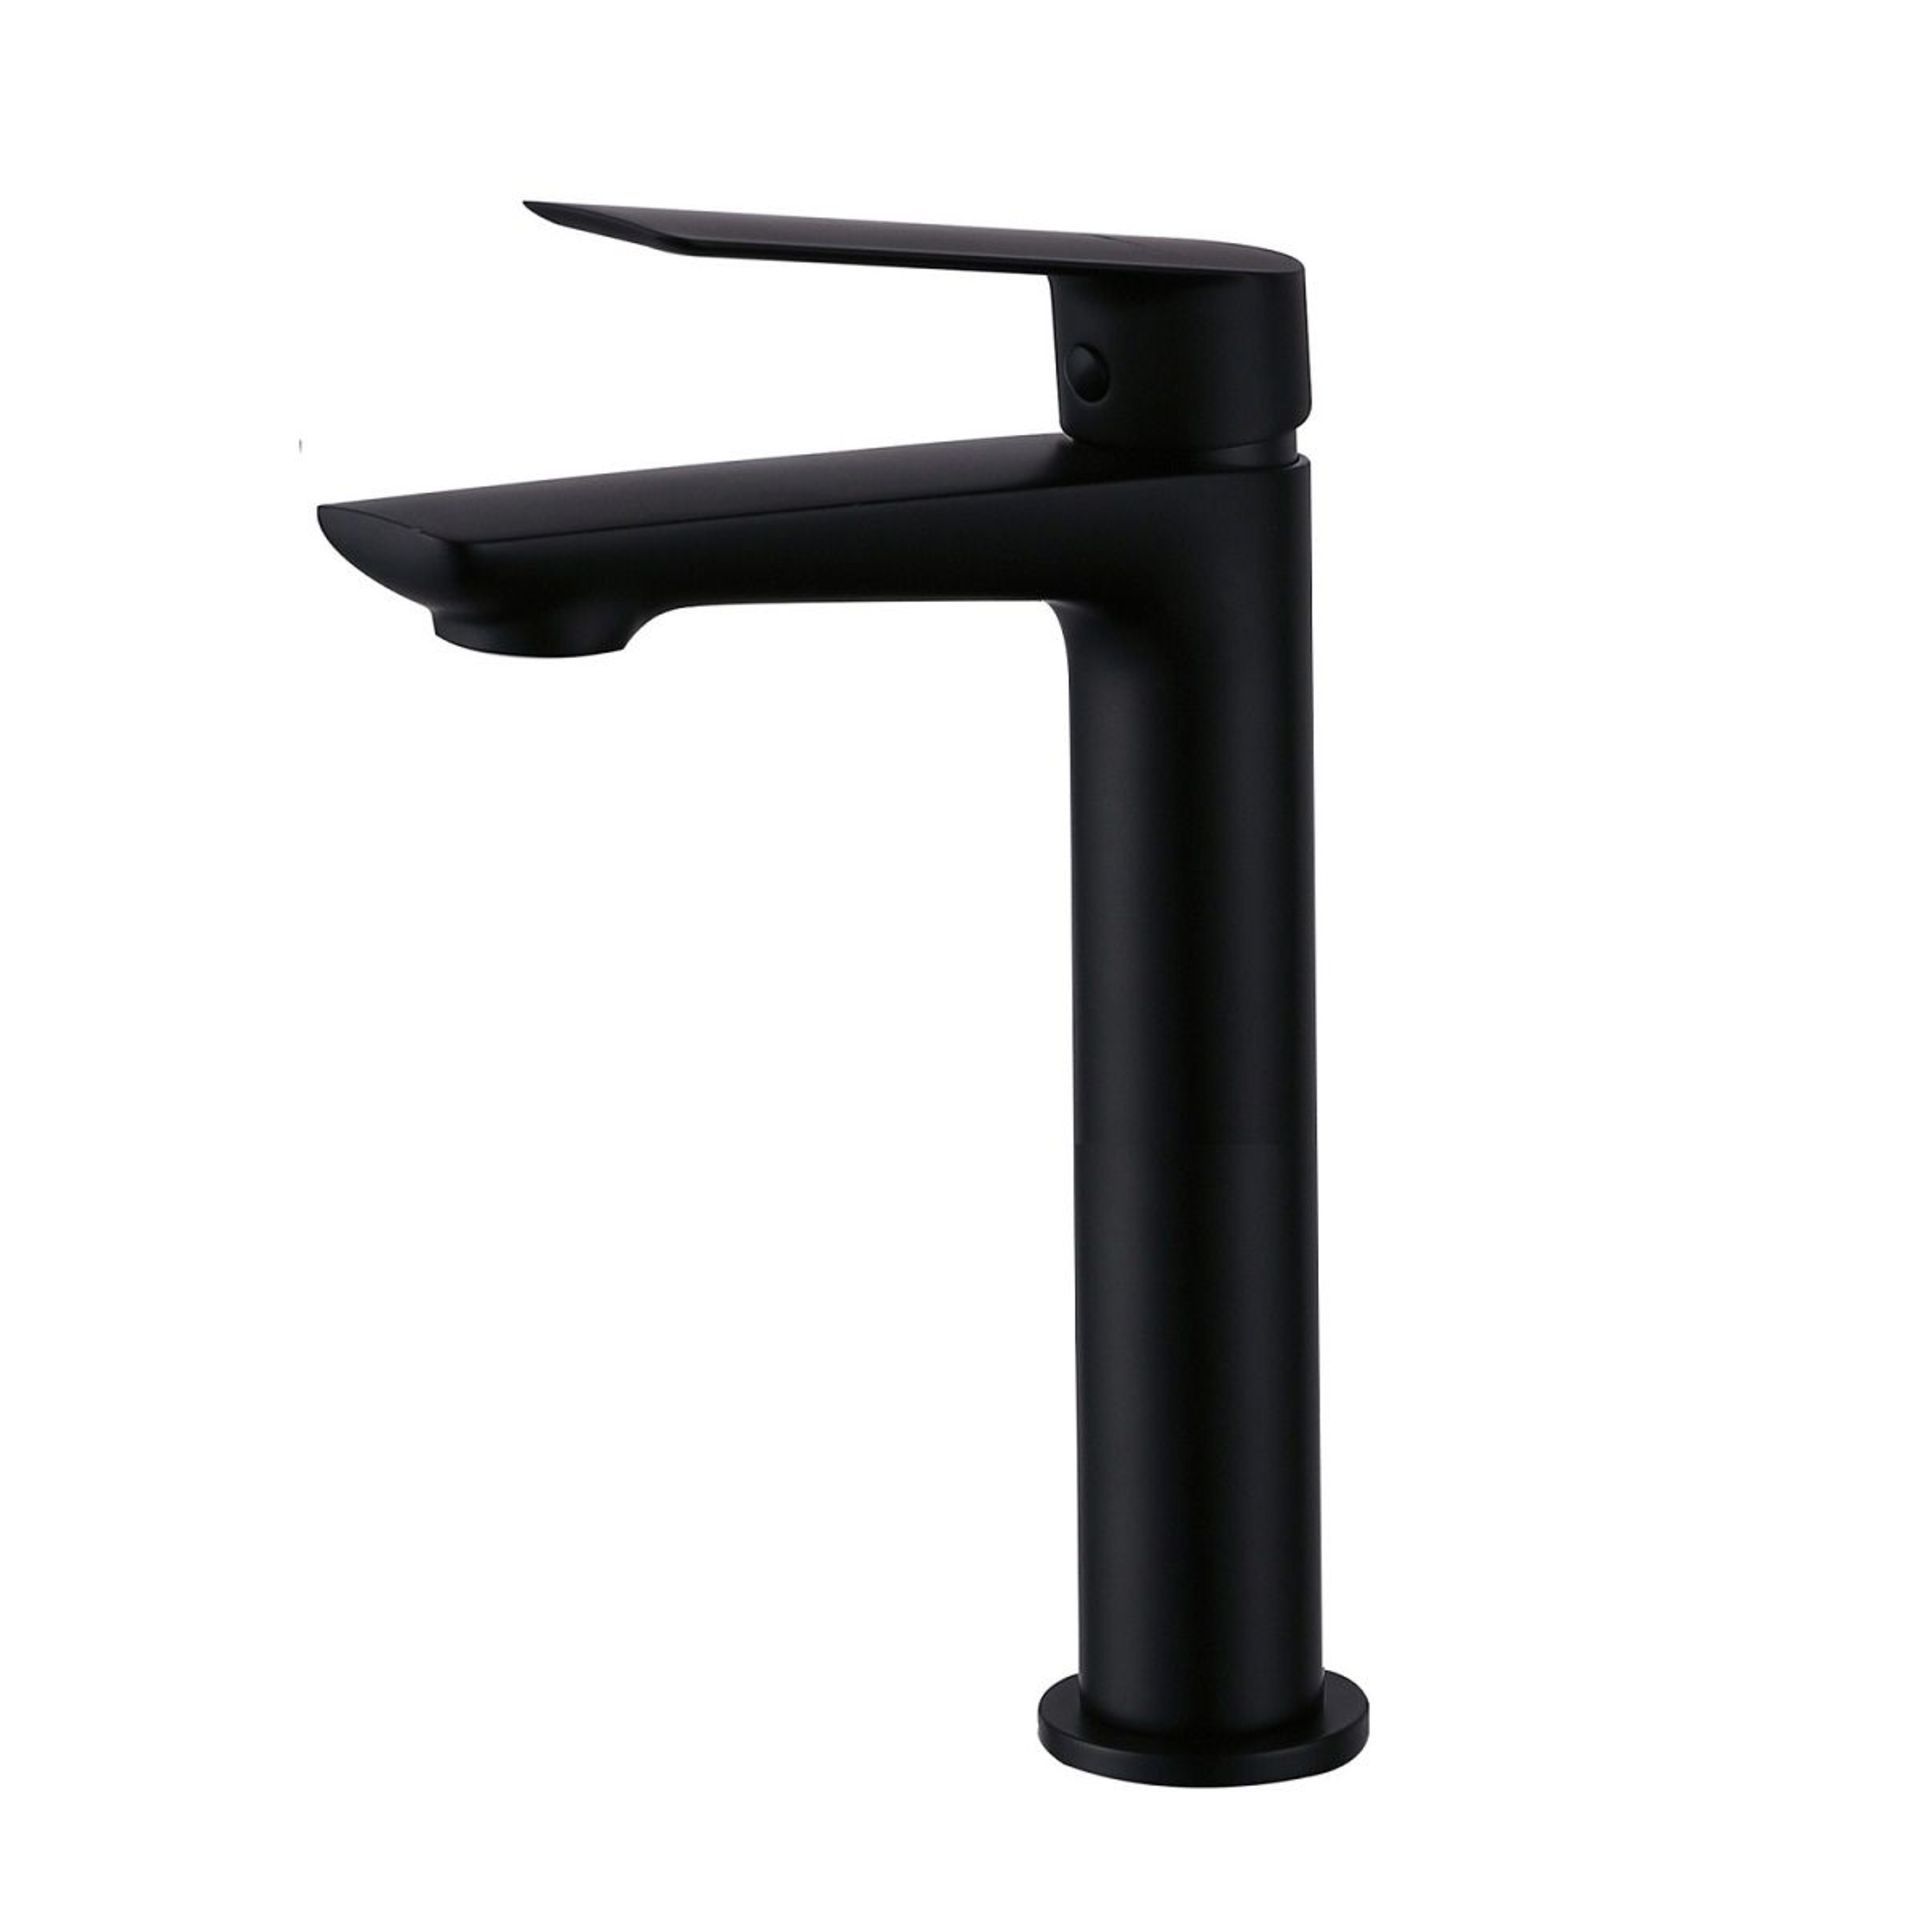 New & Boxed Finissimo Black Tall Mono Basin Mixer Tap. Tb7004.Finished In Black Material Made F... - Image 2 of 2